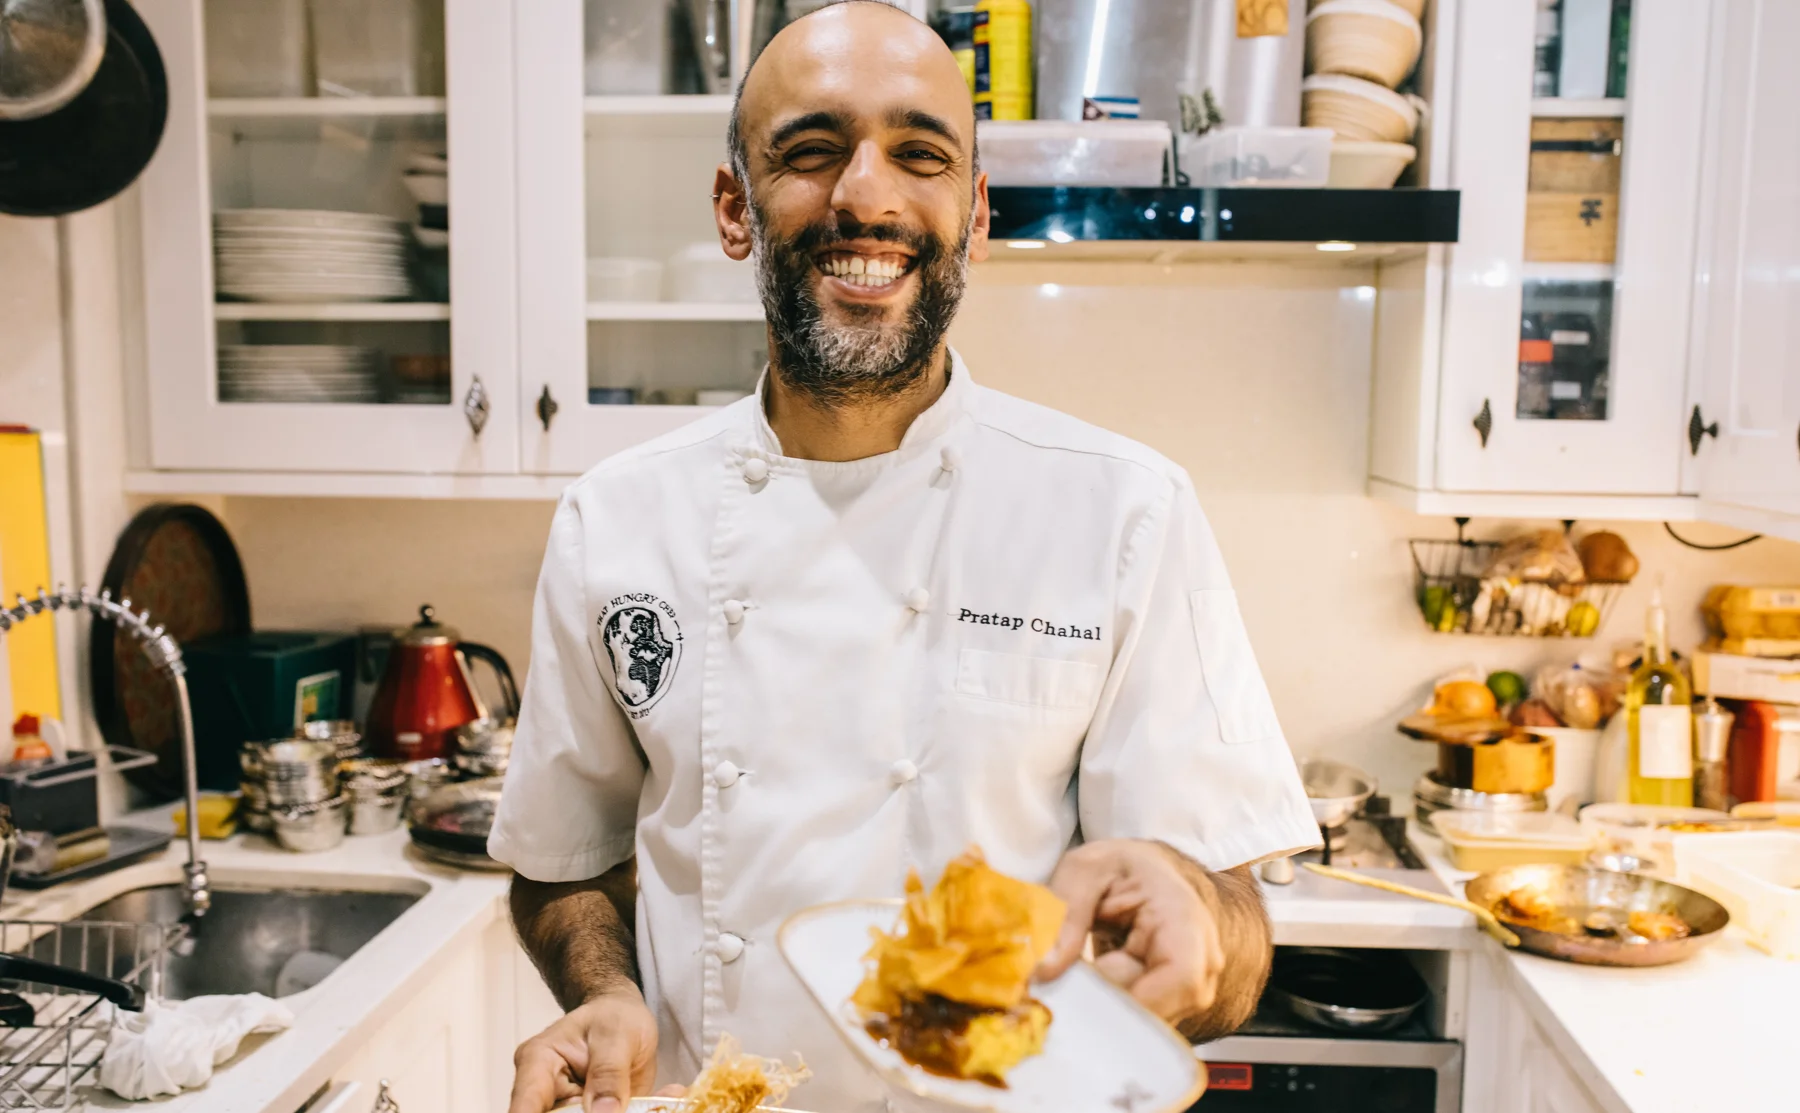 Private Dining Chef Pratap Chahal at his Islington home - 1329020